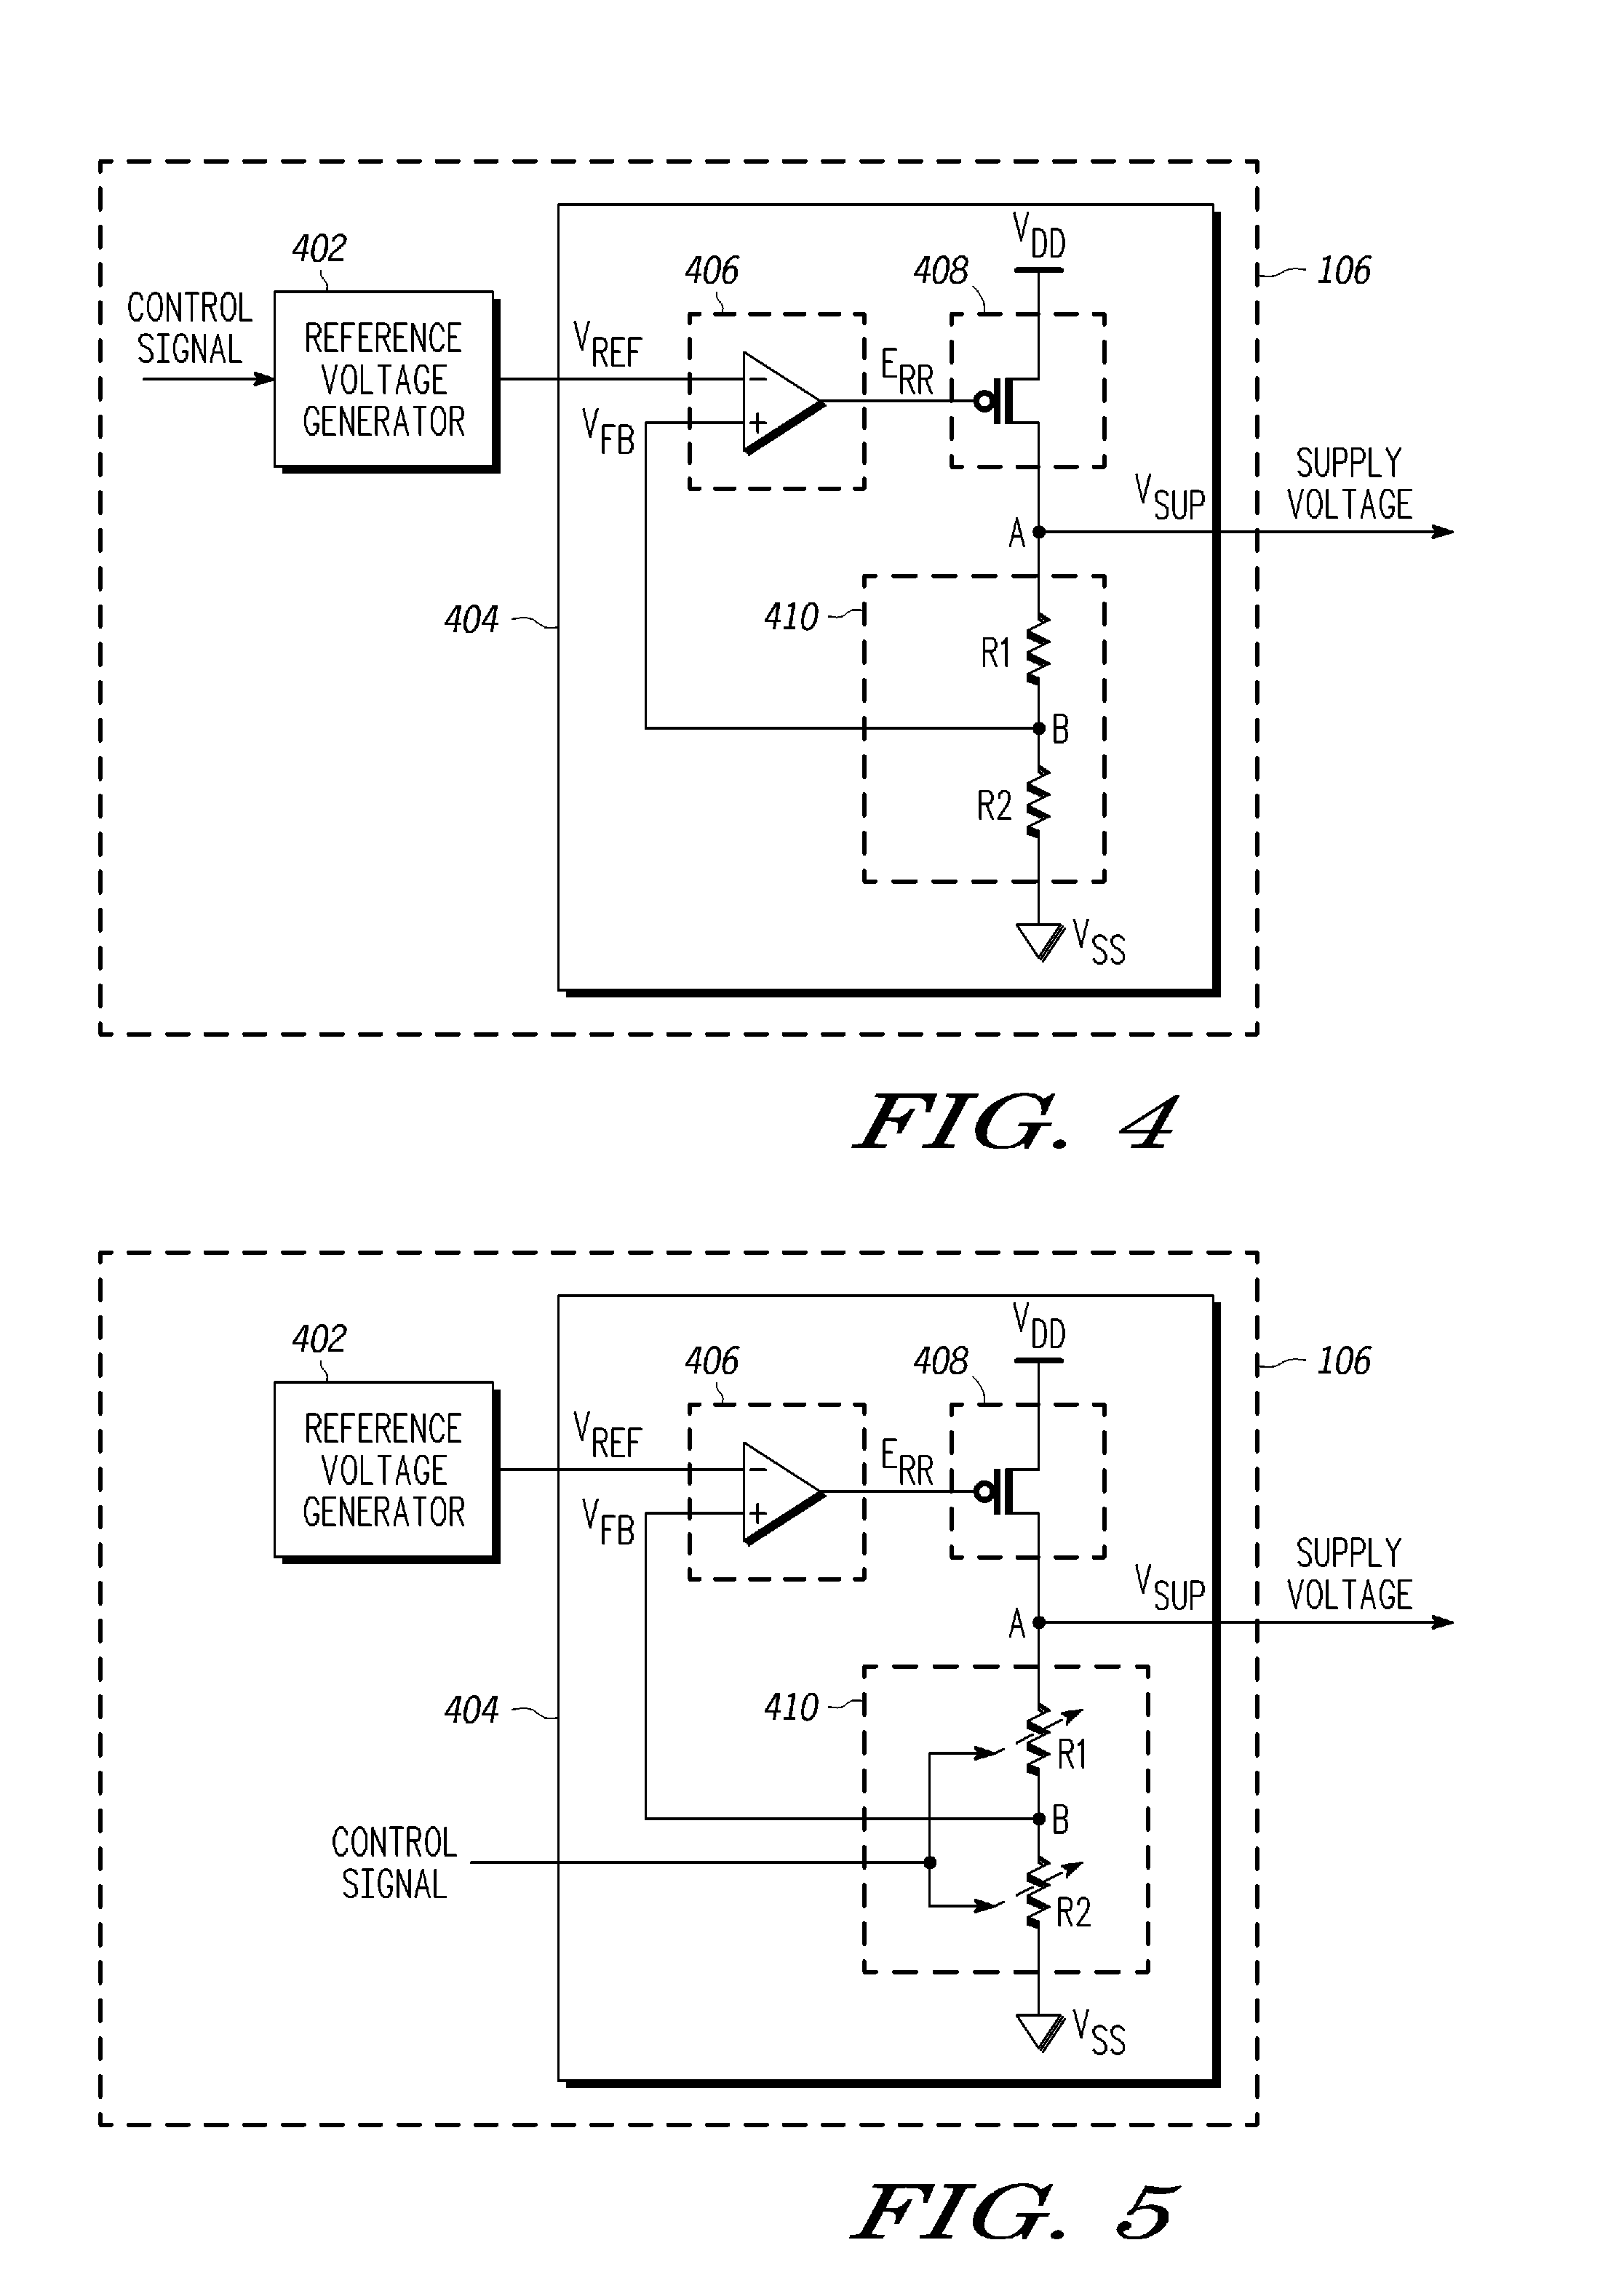 Power management in integrated circuits using process detection